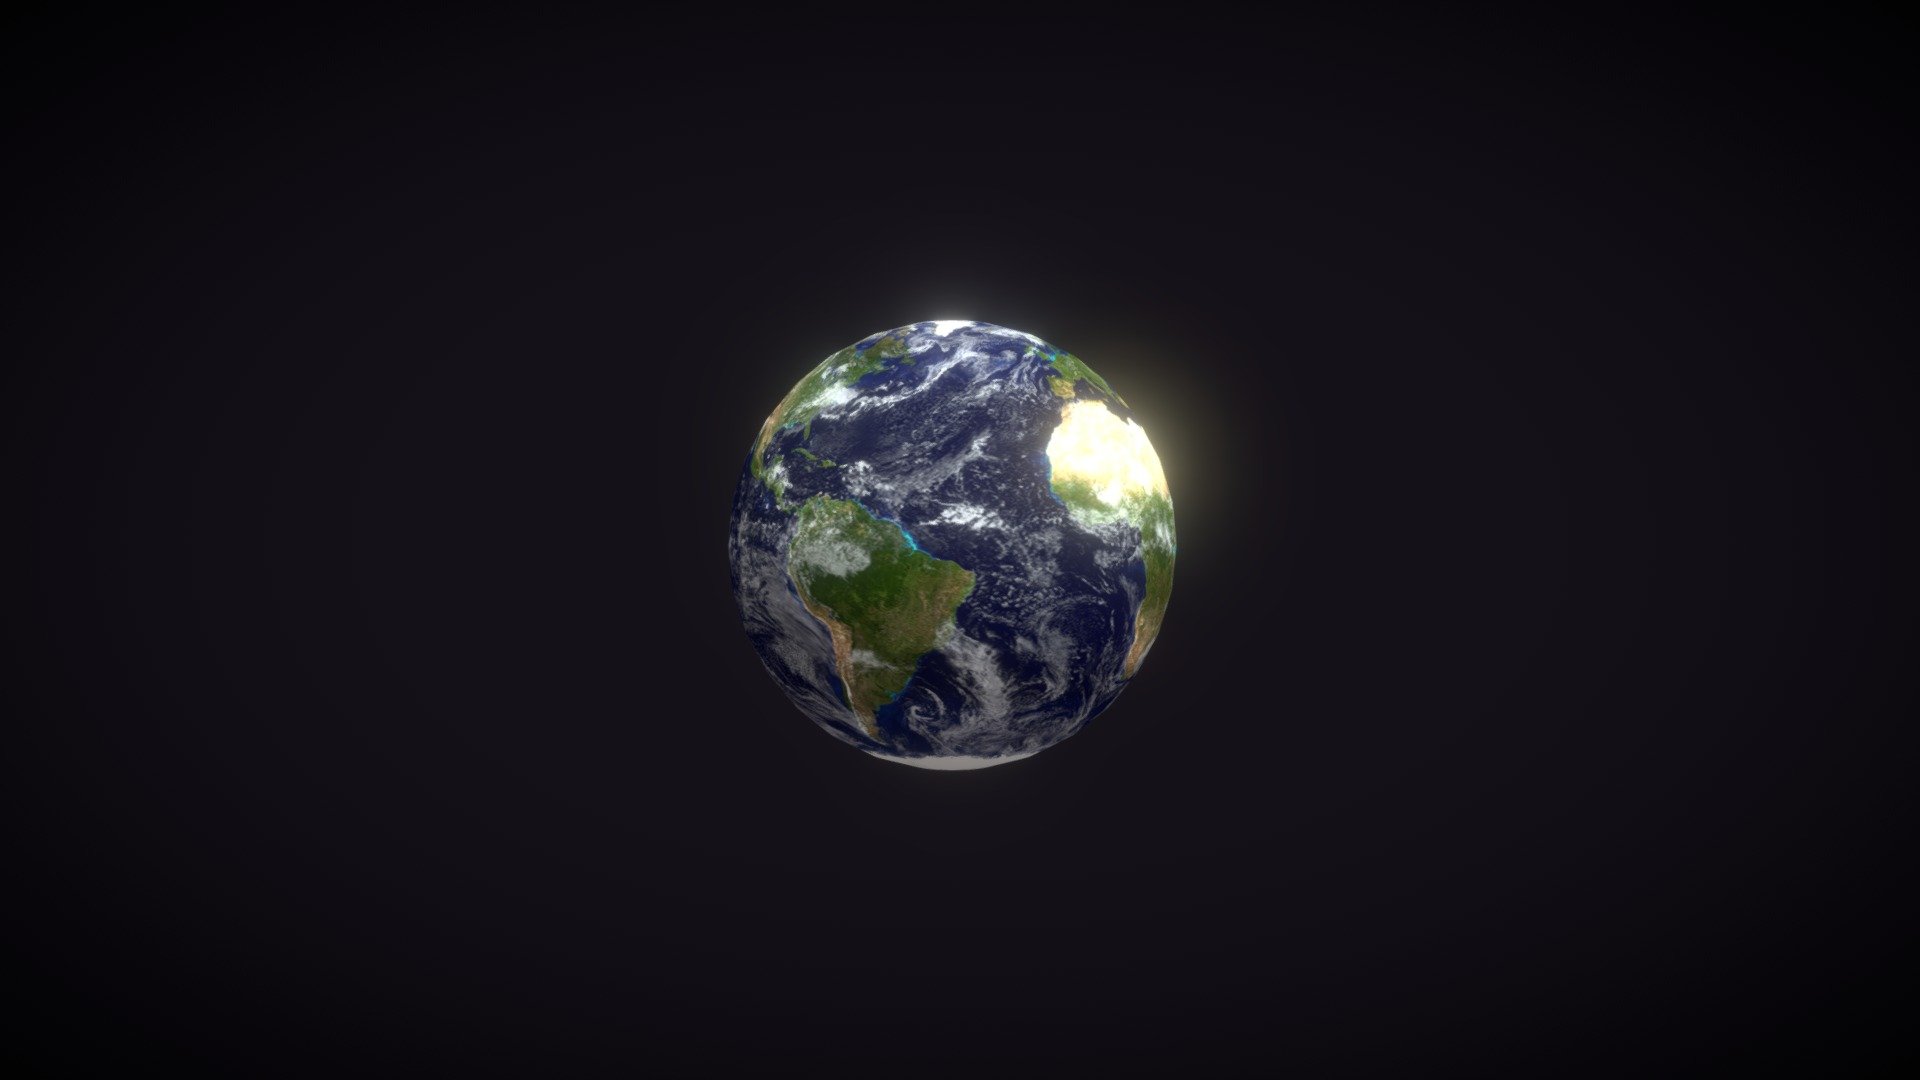 Photorealistic Earth 2k Textures 3D Model  is completely ready to be used in your games, animations, films, designs etc.

All textures and materials are included and mapped in every format. The model is completely ready for use visualization in any 3d software and engine.

Technical details:


A transparency map is included for the glass material. White color is glass, black is nonglass(can be inverted if needed).
File formats included in the package are: FBX, OBJ, ABC, DAE, GLB, PLY, STL, x3d
Native software file format: BLEND
Overall vertex count: 482
Textures: Color, Metallic, Roughness, Normal, AO.
All textures are 2k (2048x2048) resolution.

Notes:


The model uses only color and normal textures and there is also the texture for the background stars in the pack.
 - Photorealistic Earth 2k Textures 3D Model - Buy Royalty Free 3D model by 3DDisco 3d model